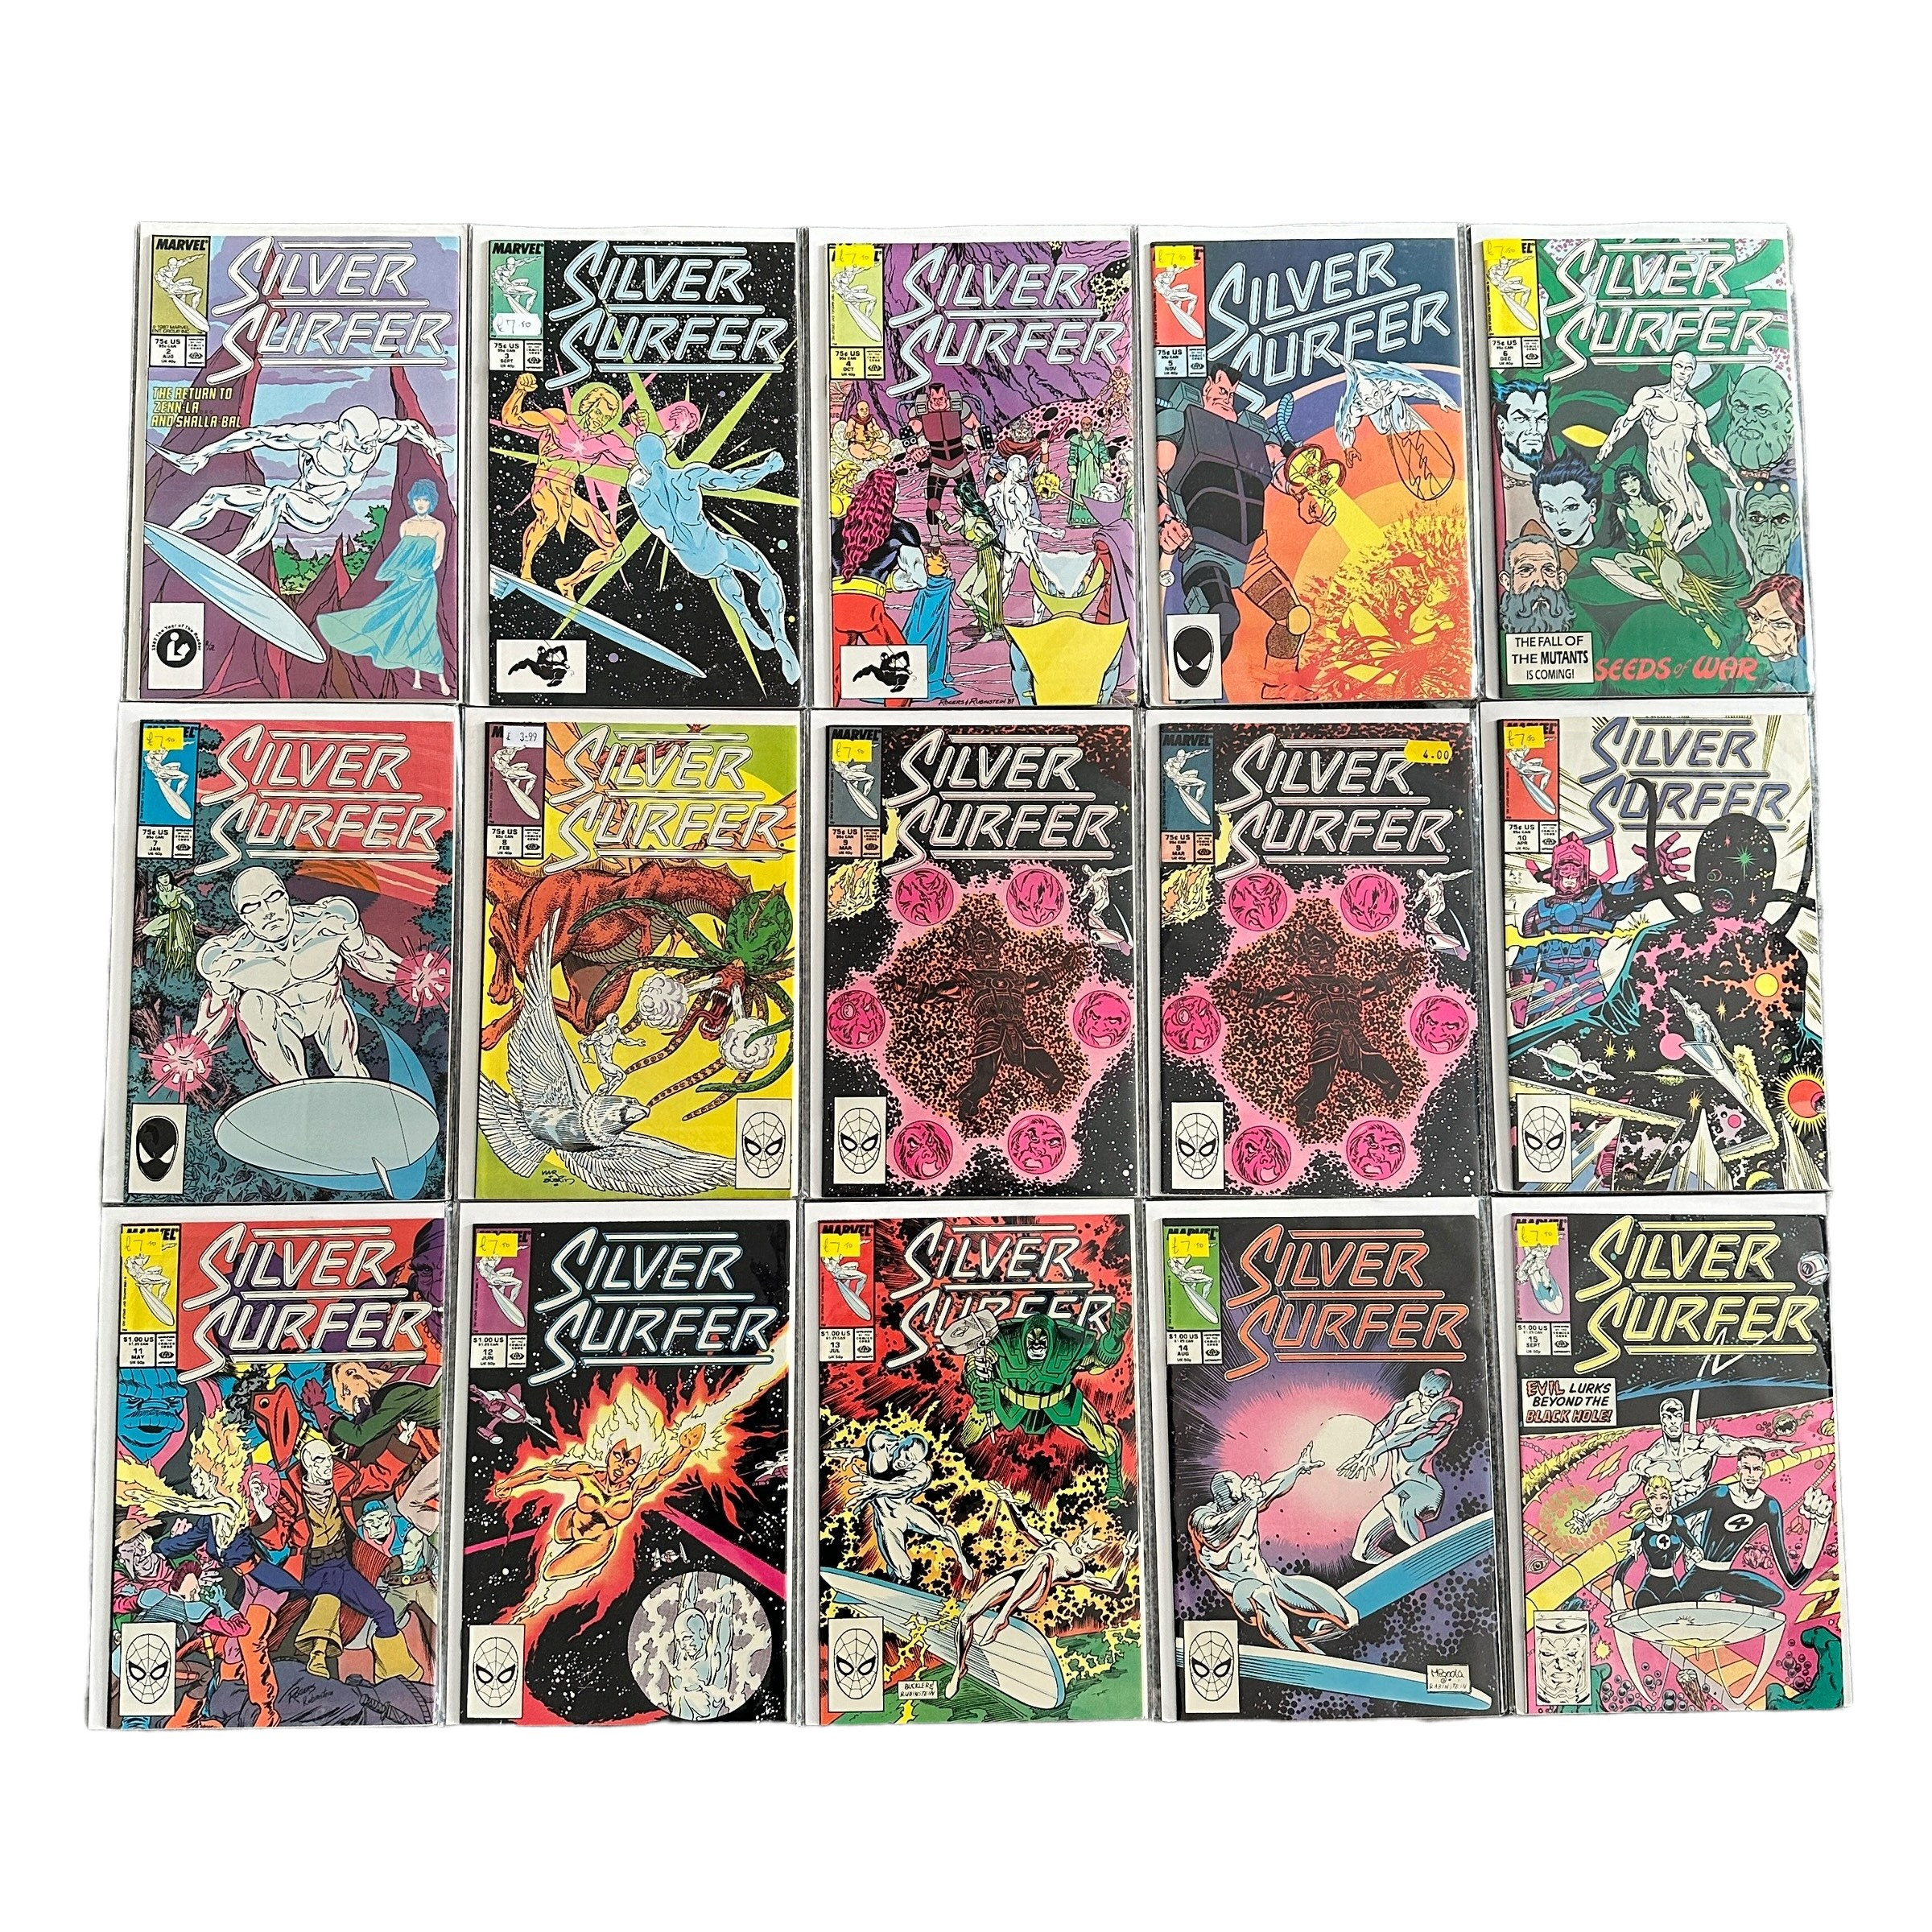 Marvel Silver Surfer 1980s Nos 2-21, 62: All 22 comics bagged & boarded, NM.